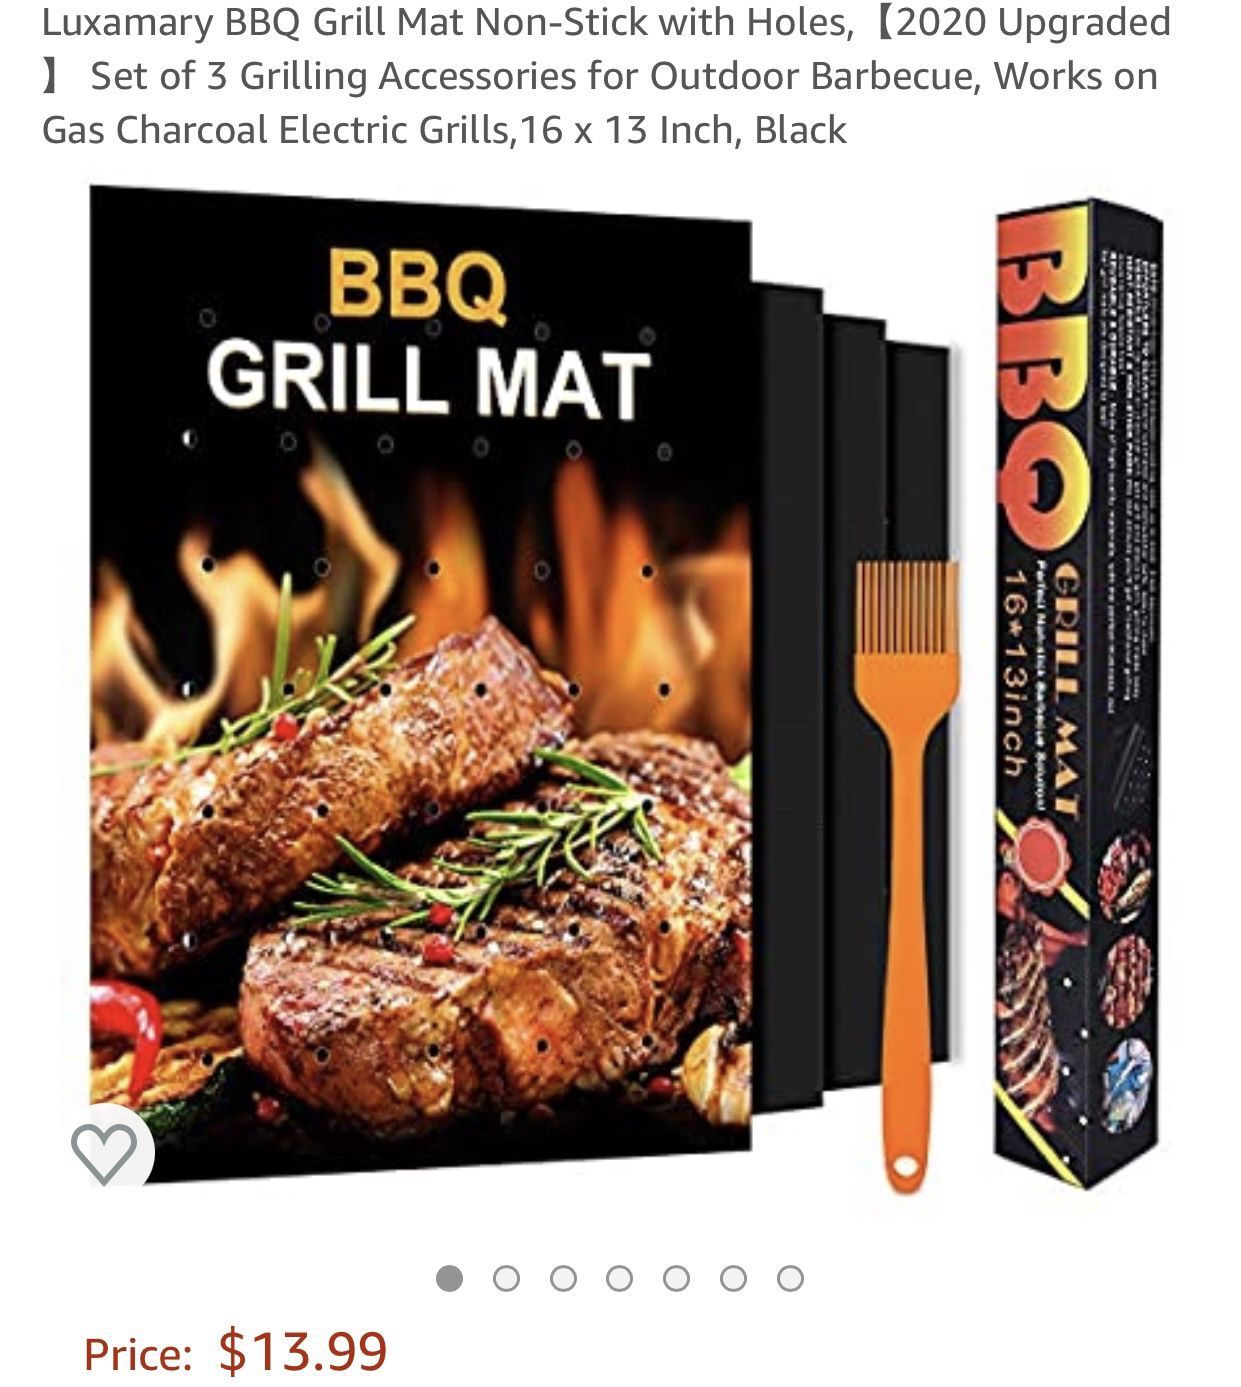 BBQ Grill Mat Non-Stick with Holes